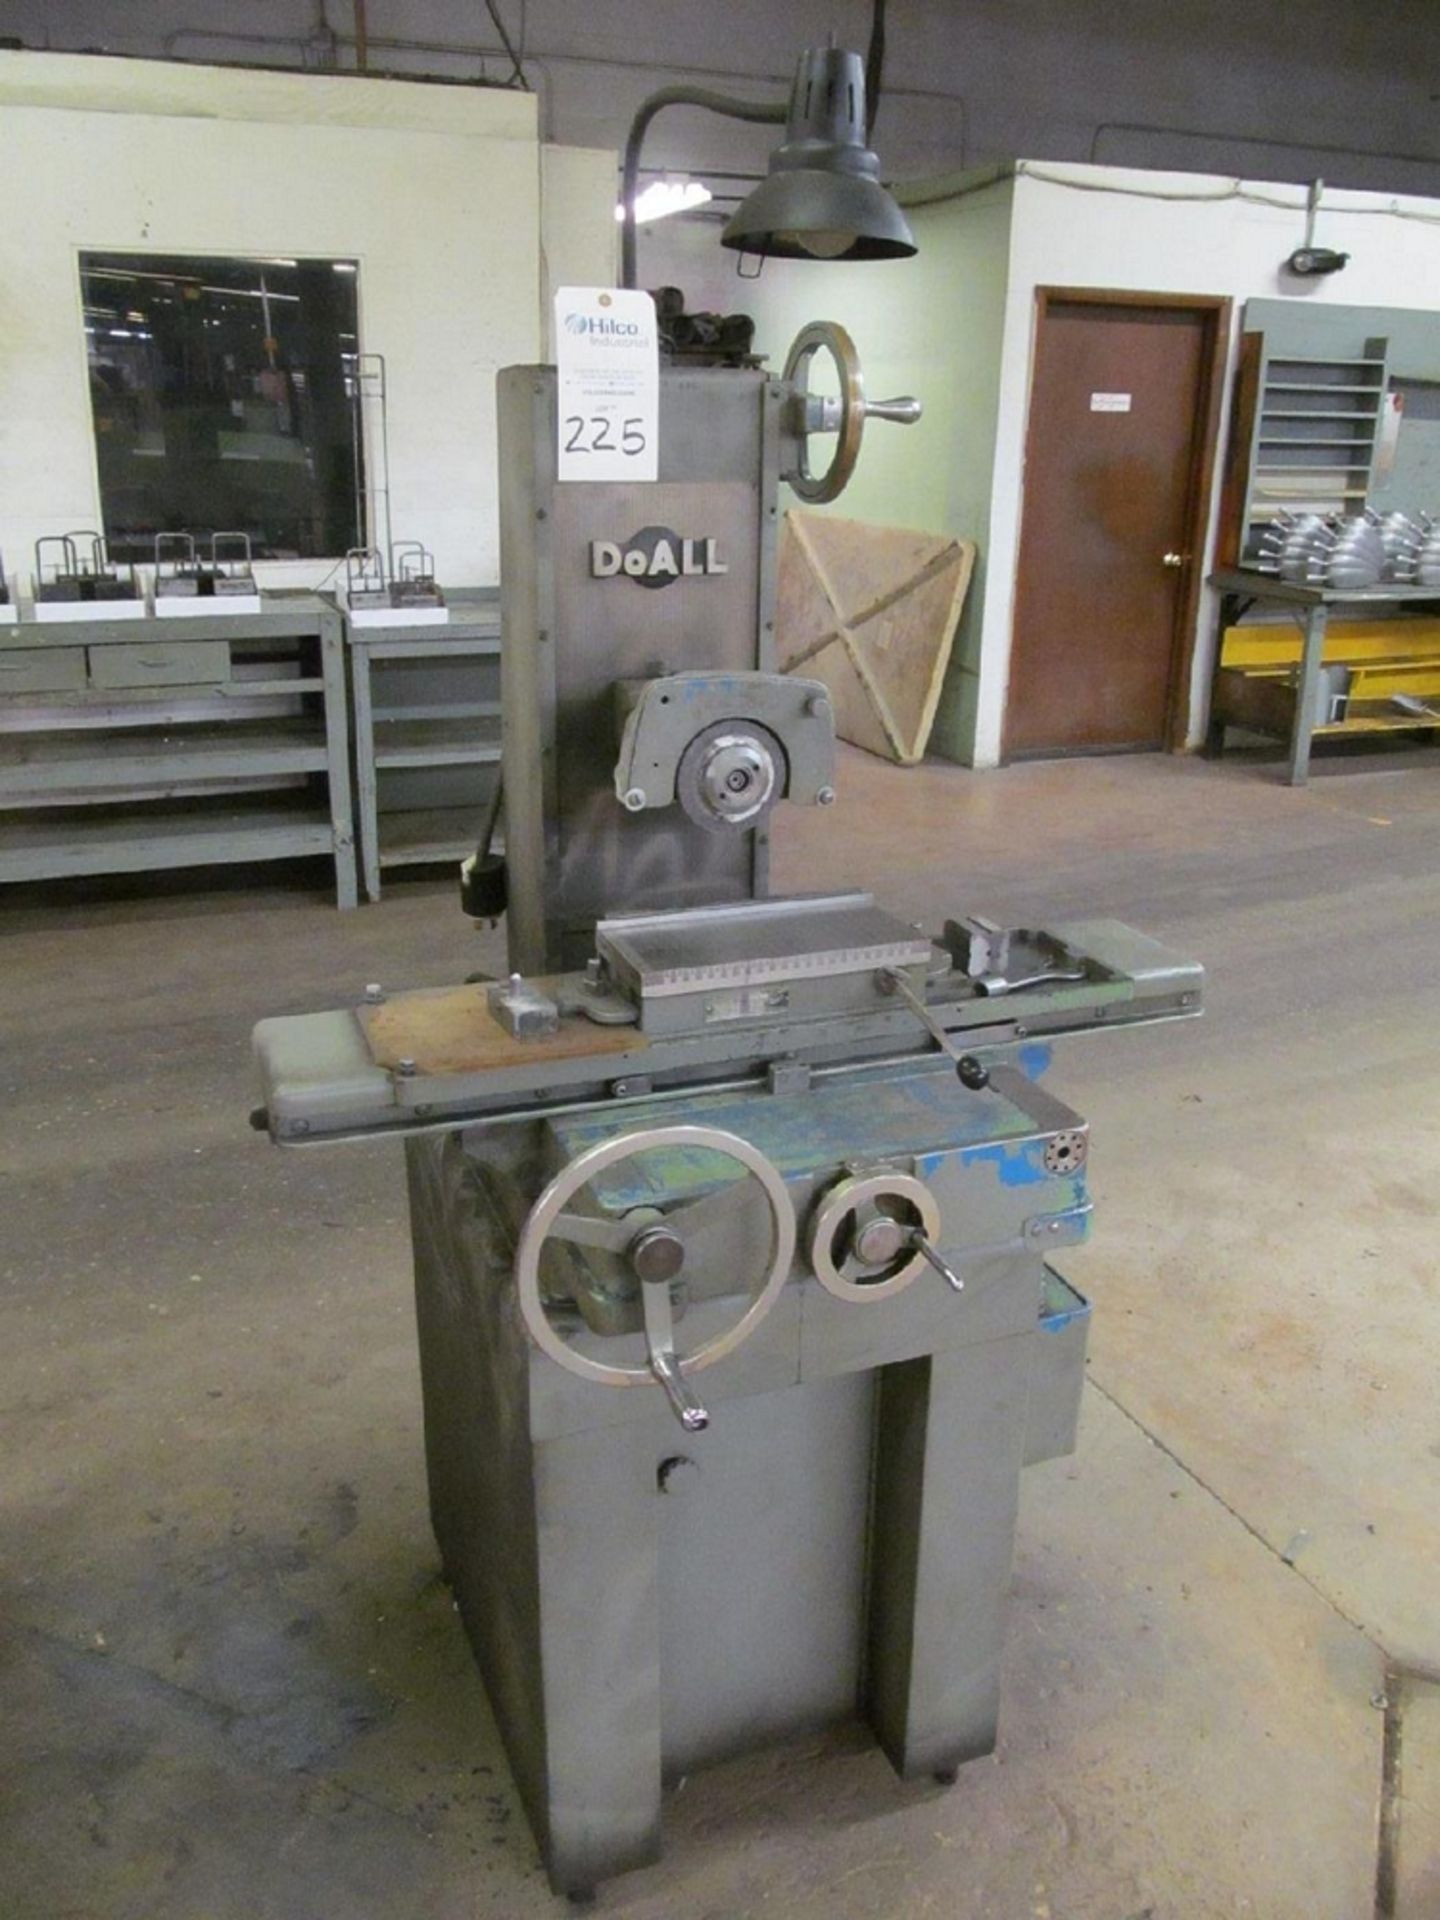 DoAll Model DH-612 6" x 12" Hand Surface Grinder